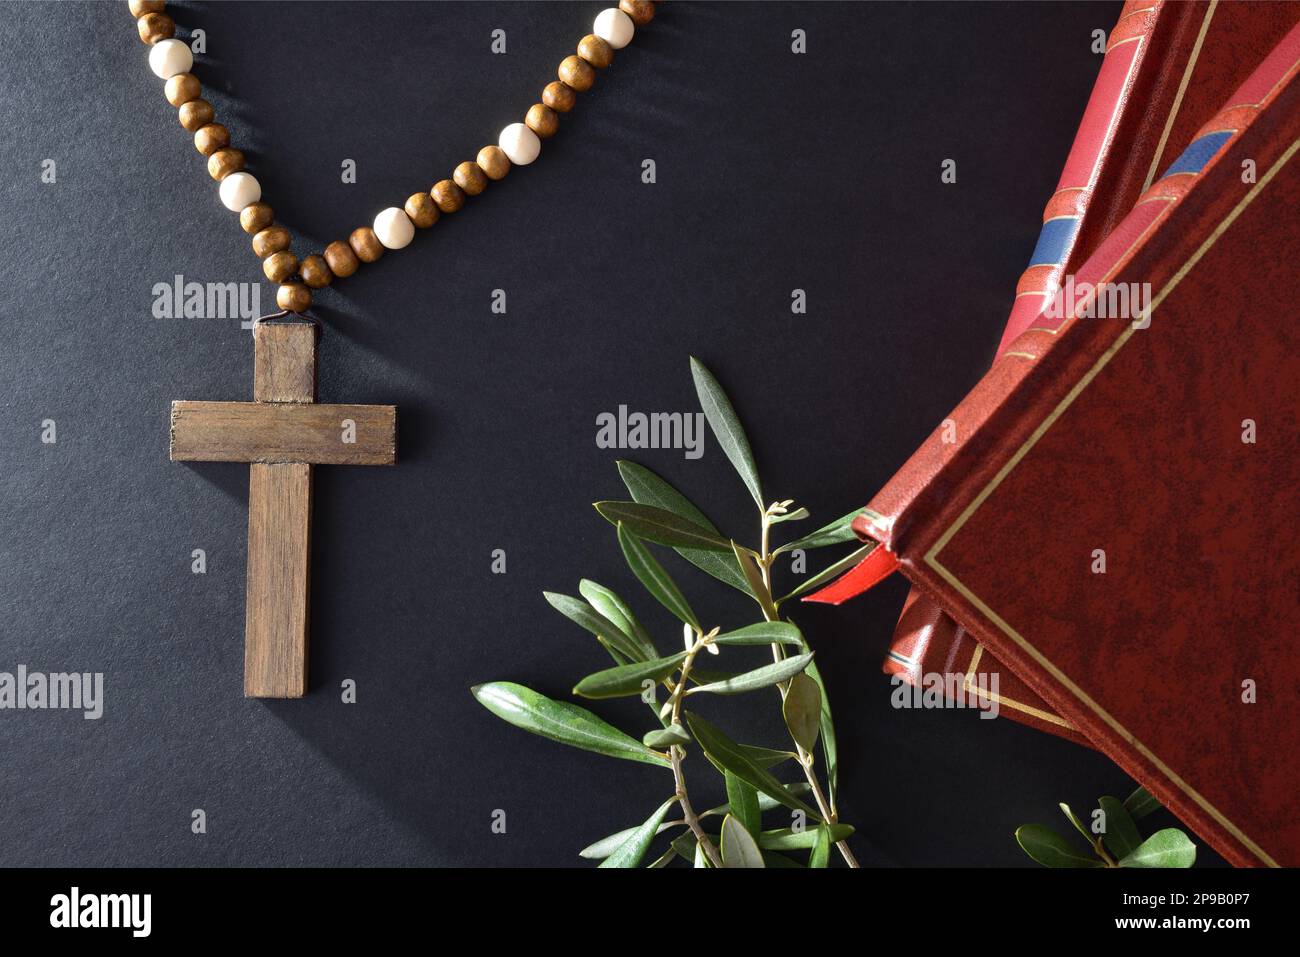 Easter religious background with symbols as books christian cross and olive branches on black table. Top view. Stock Photo